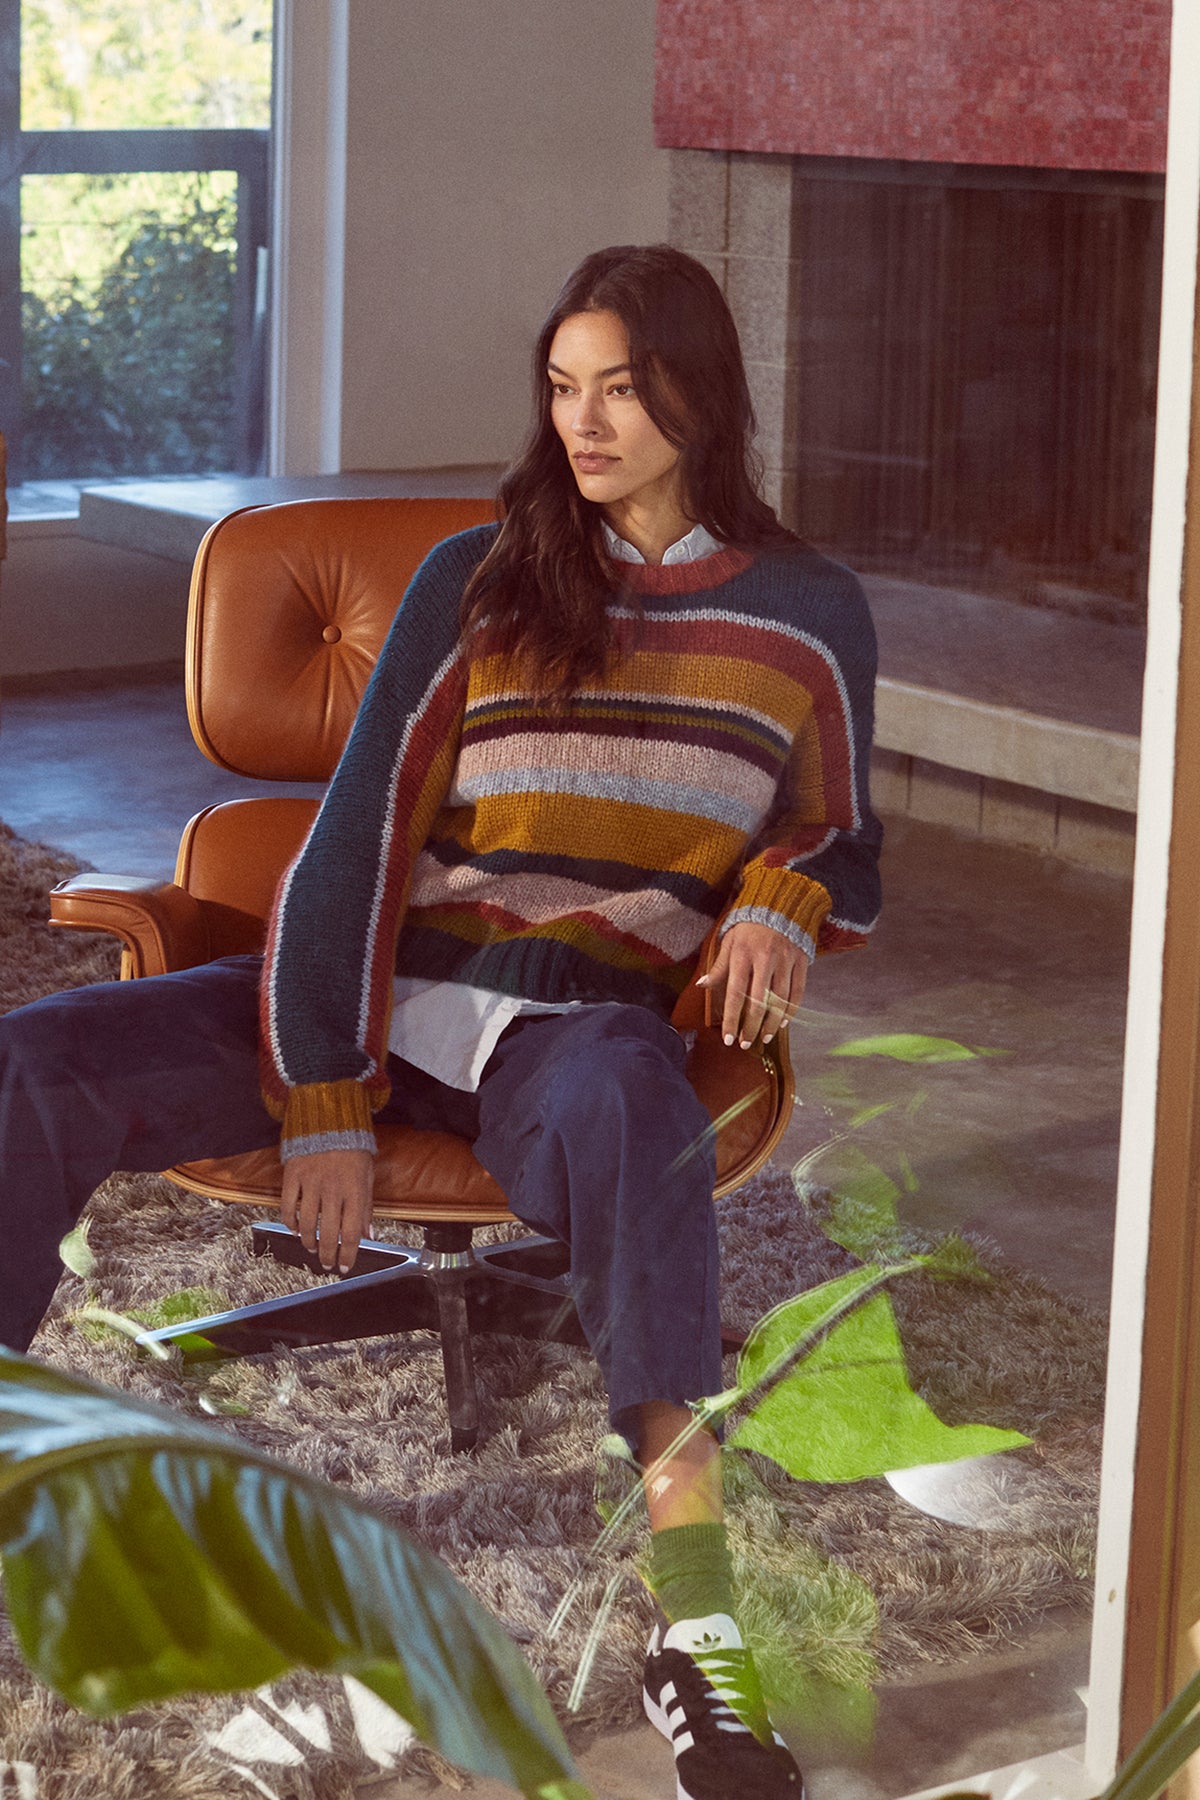   A woman sitting on a cozy chair in a living room wearing the Velvet by Graham & Spencer SAMARA STRIPED CREW NECK SWEATER. 